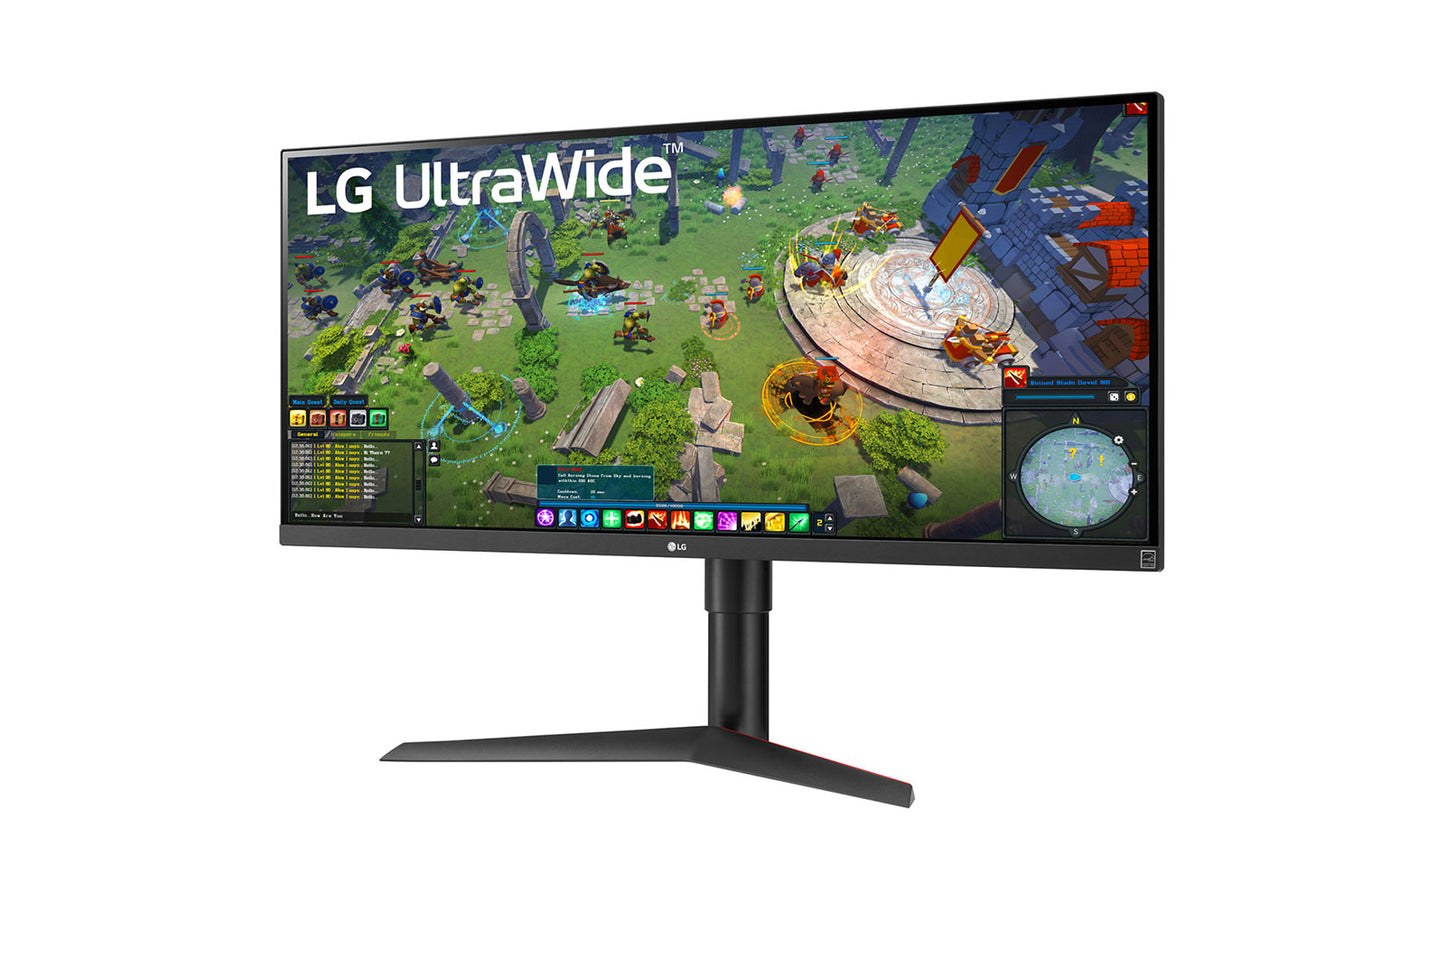 LG 34WP65G-B 34" Ultra-Wide Fhd Gaming Monitor (Brand New)